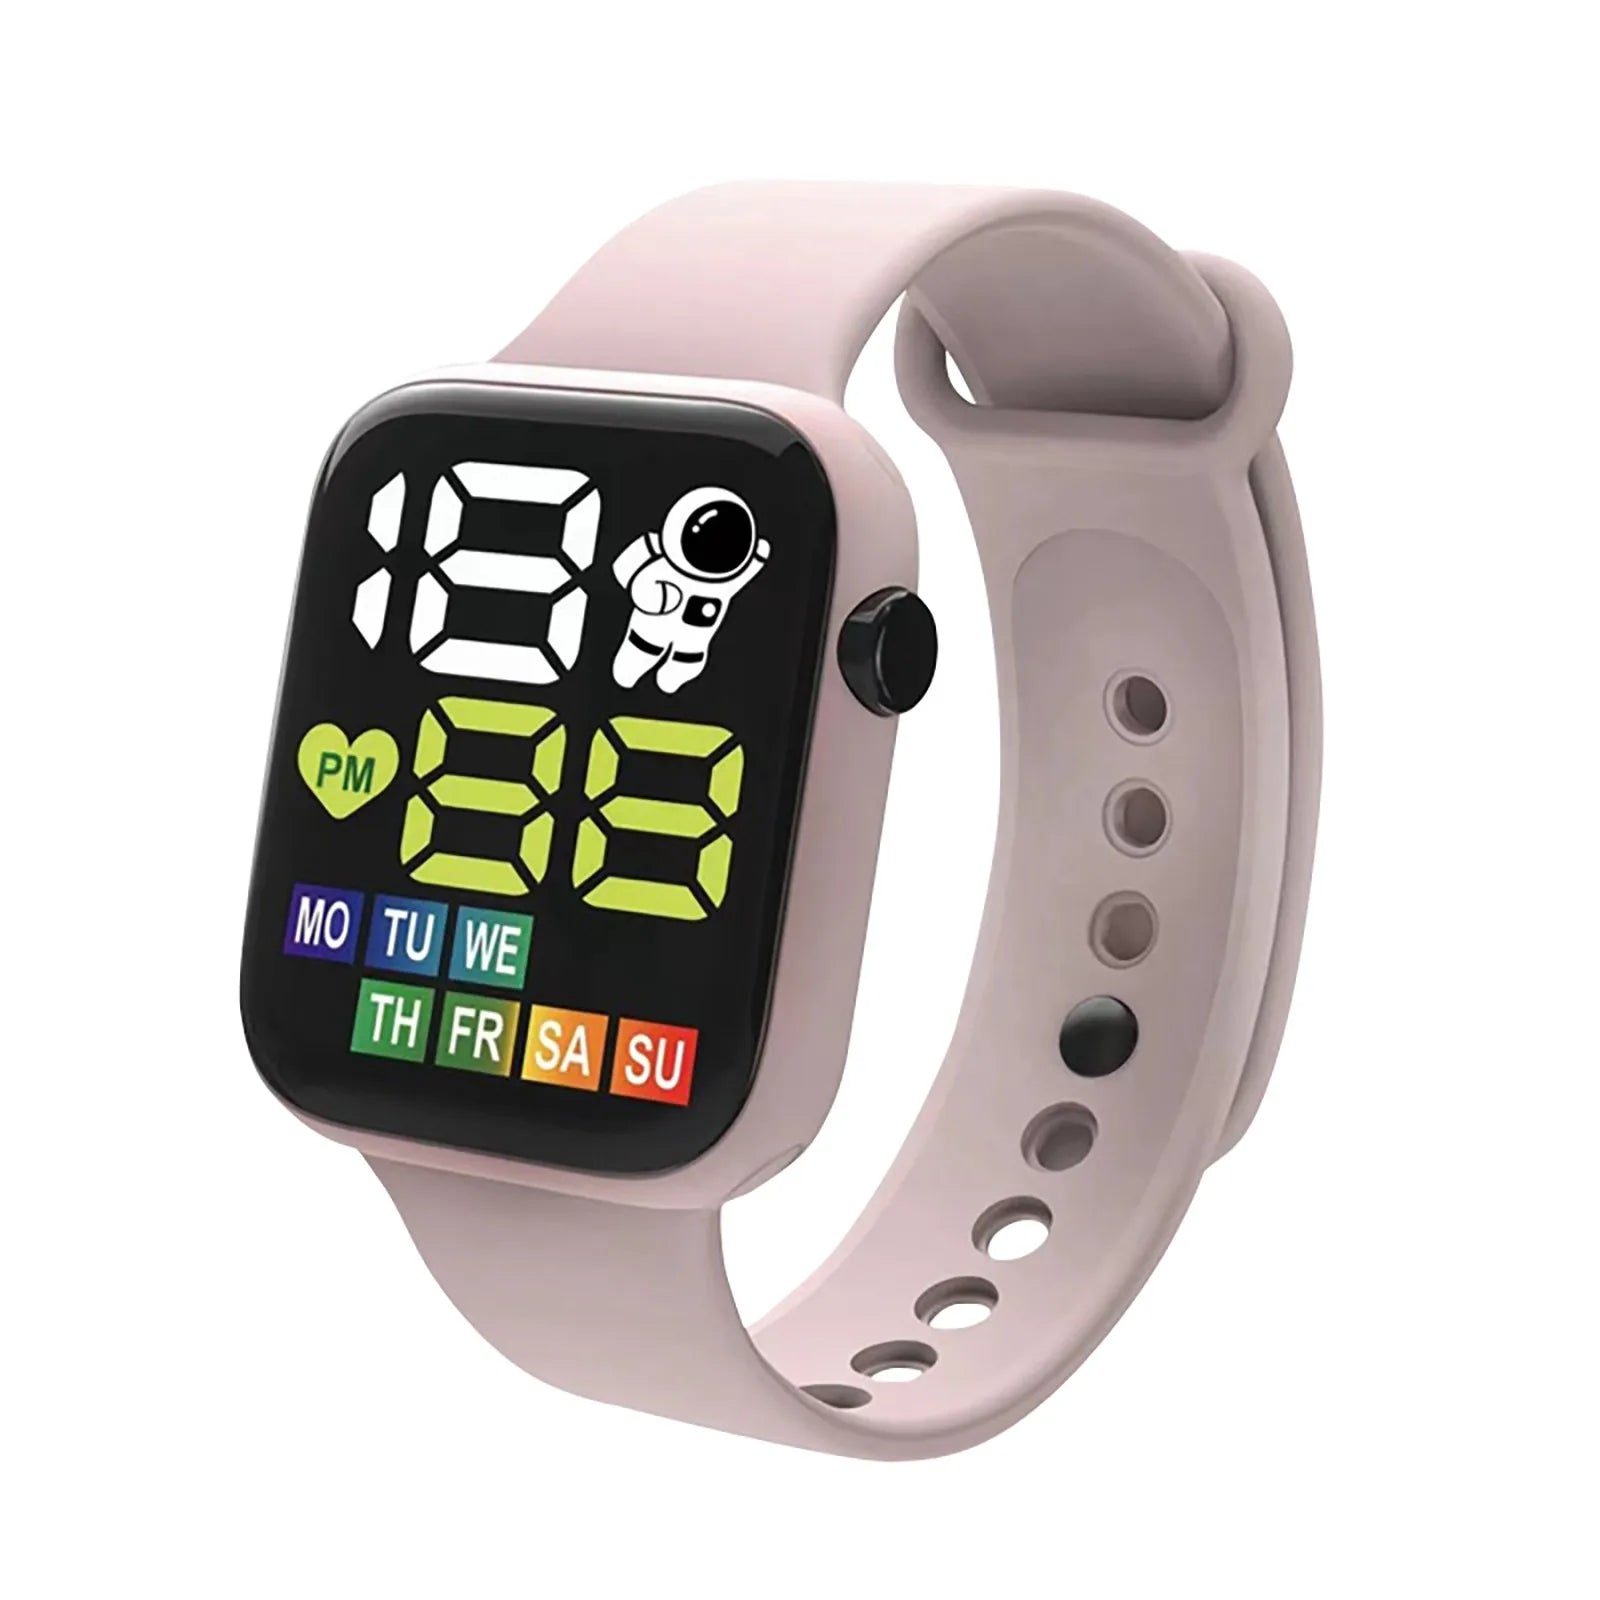 Digital LED Children's Smart Sport Watch with Adjustable Strap - High Quality Materials and Easy Operation  OurLum.com   